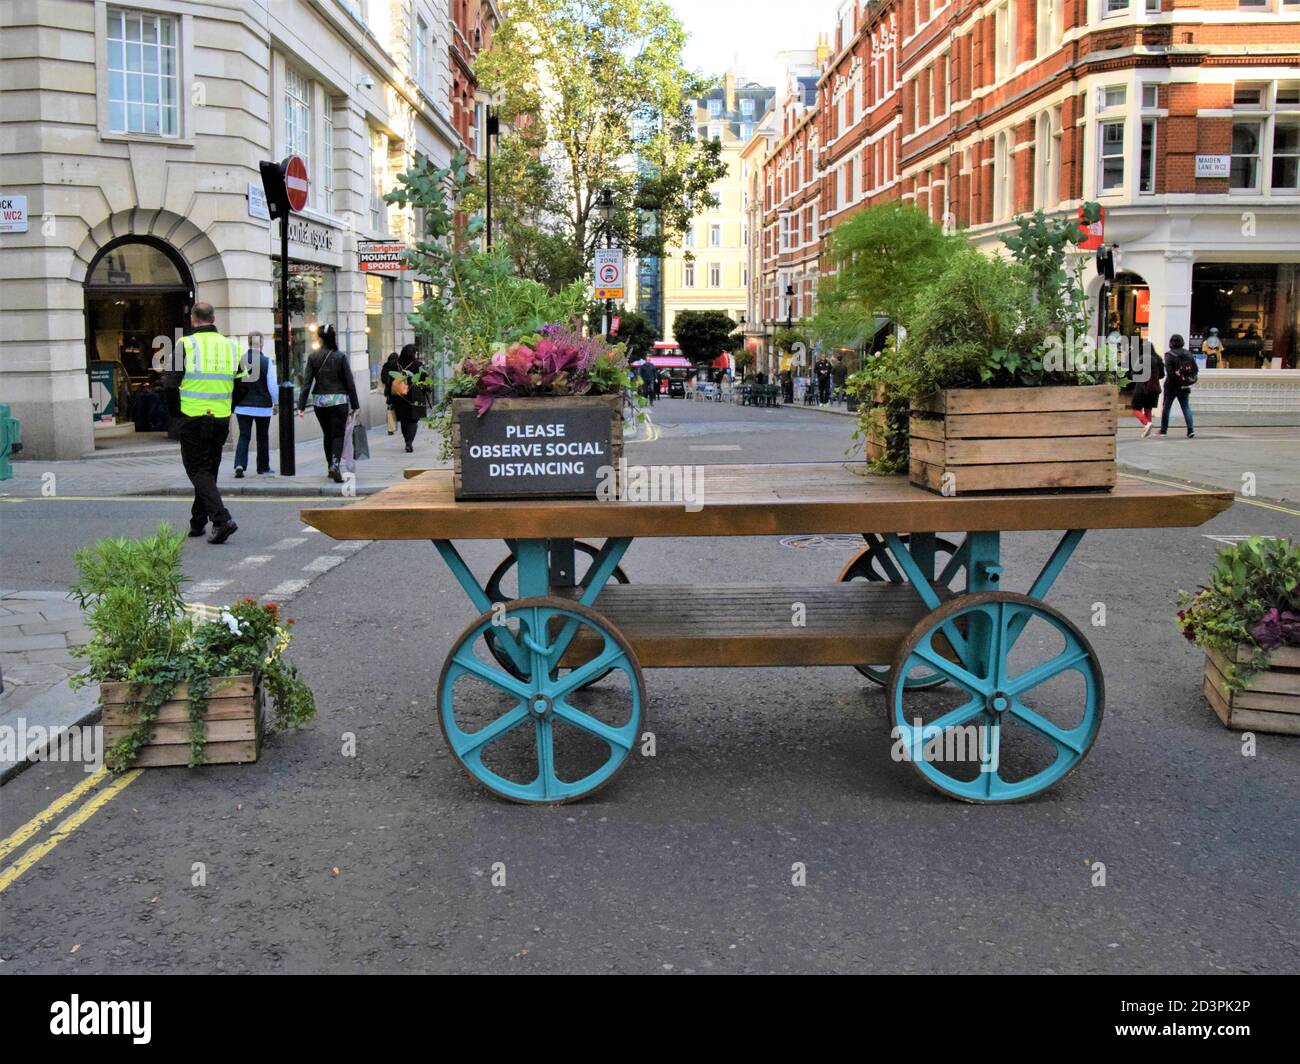 Please Observe Social Distancing street sign and traffic restriction barrier in Covent Garden, London, 2020. Signs and similar carts have been placed around Covent Garden to restrict vehicle traffic and facilitate social distancing during the pandemic. Stock Photo